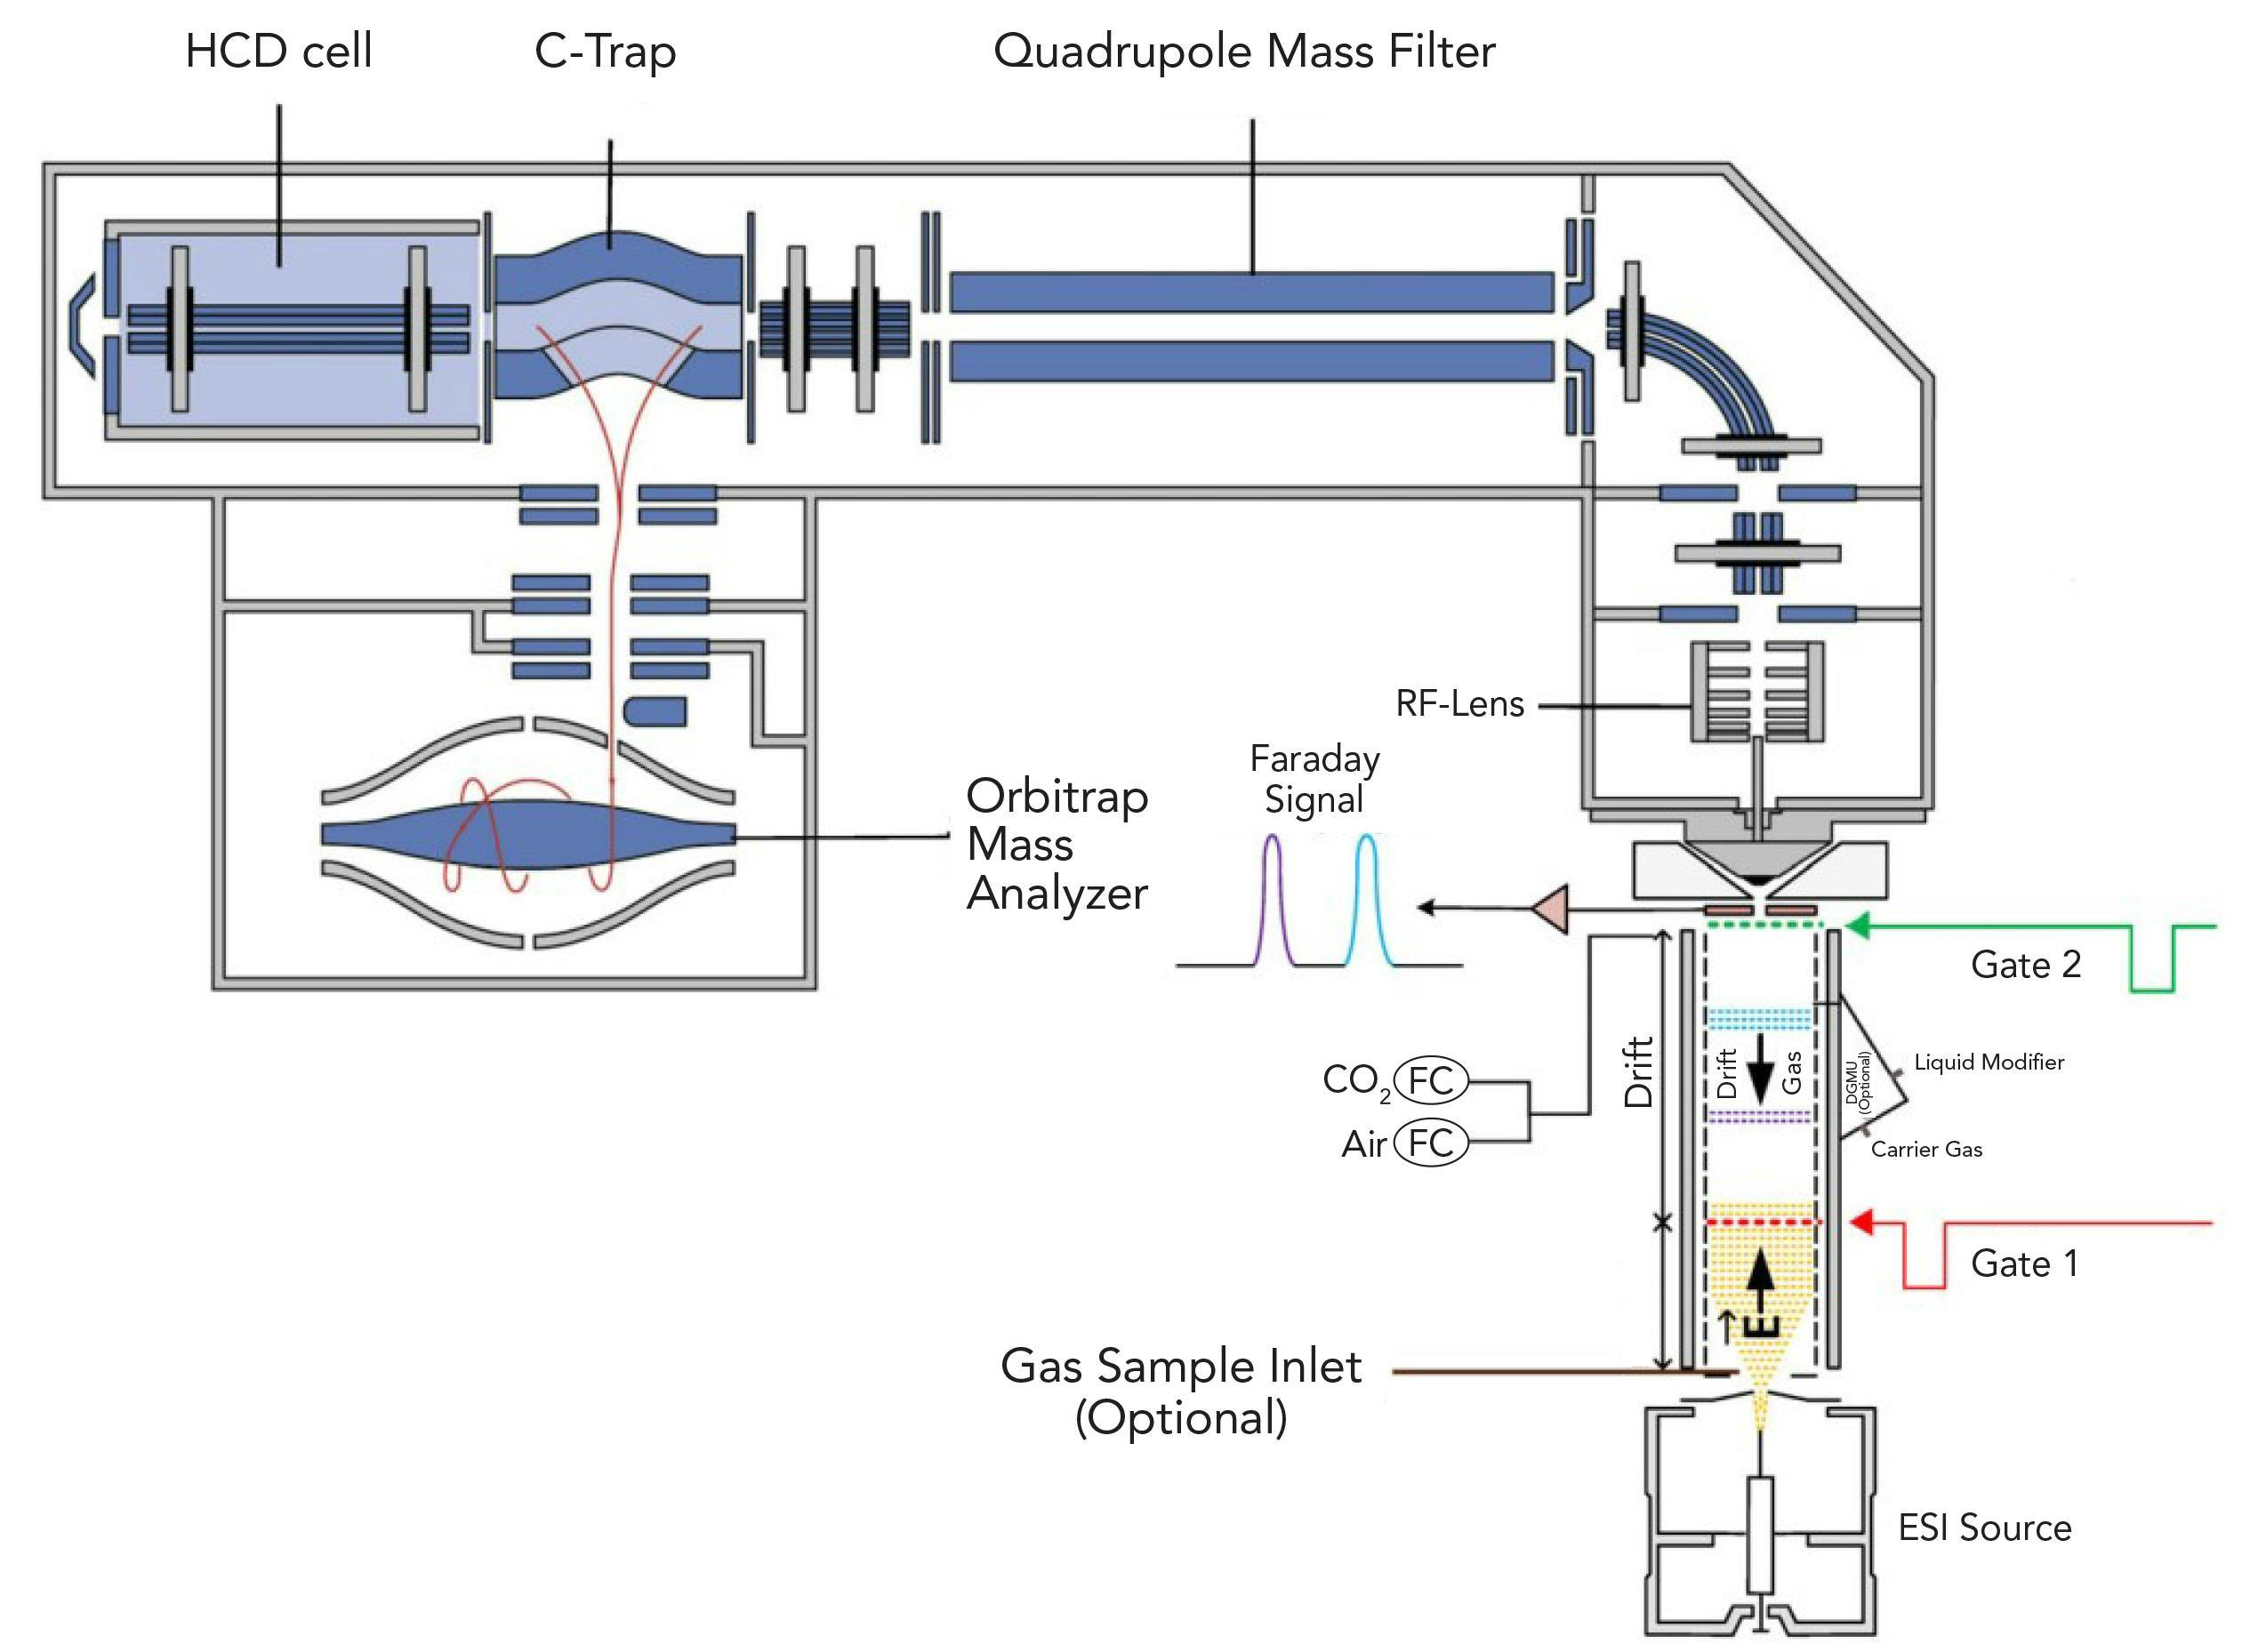 Figure 1: Instrument layout details of the dual‐gate linear drift tube operated at atmospheric pressure prior to the mass spectrometer. The drift tube replaces the standard electrospray ionization (ESI) source on the front of the MS instrument.